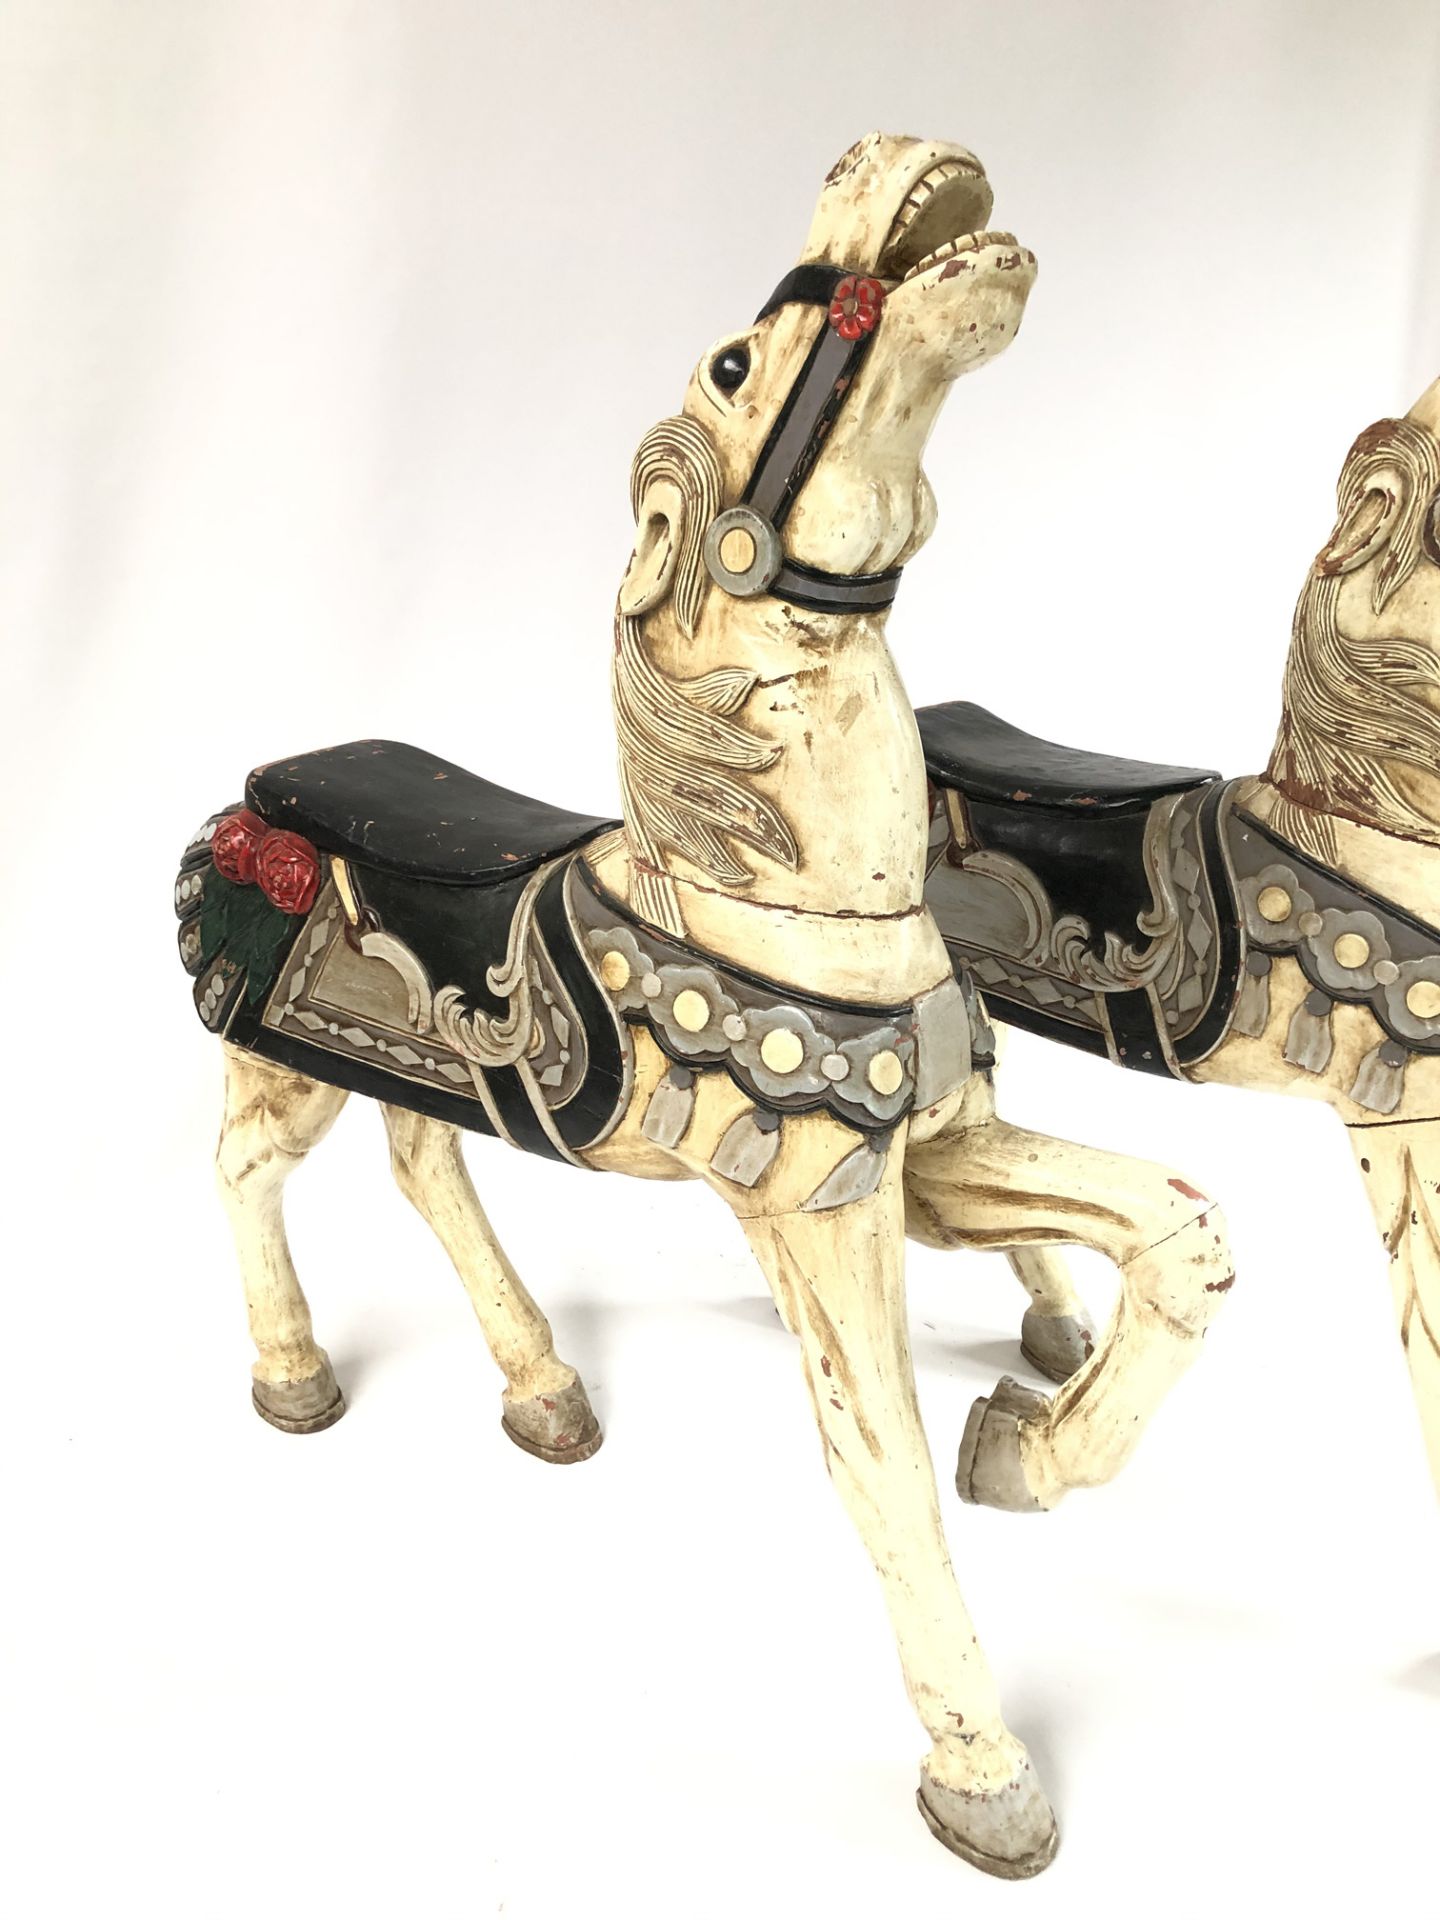 Two Reproduction Wooden Carousel Horses - Image 2 of 5